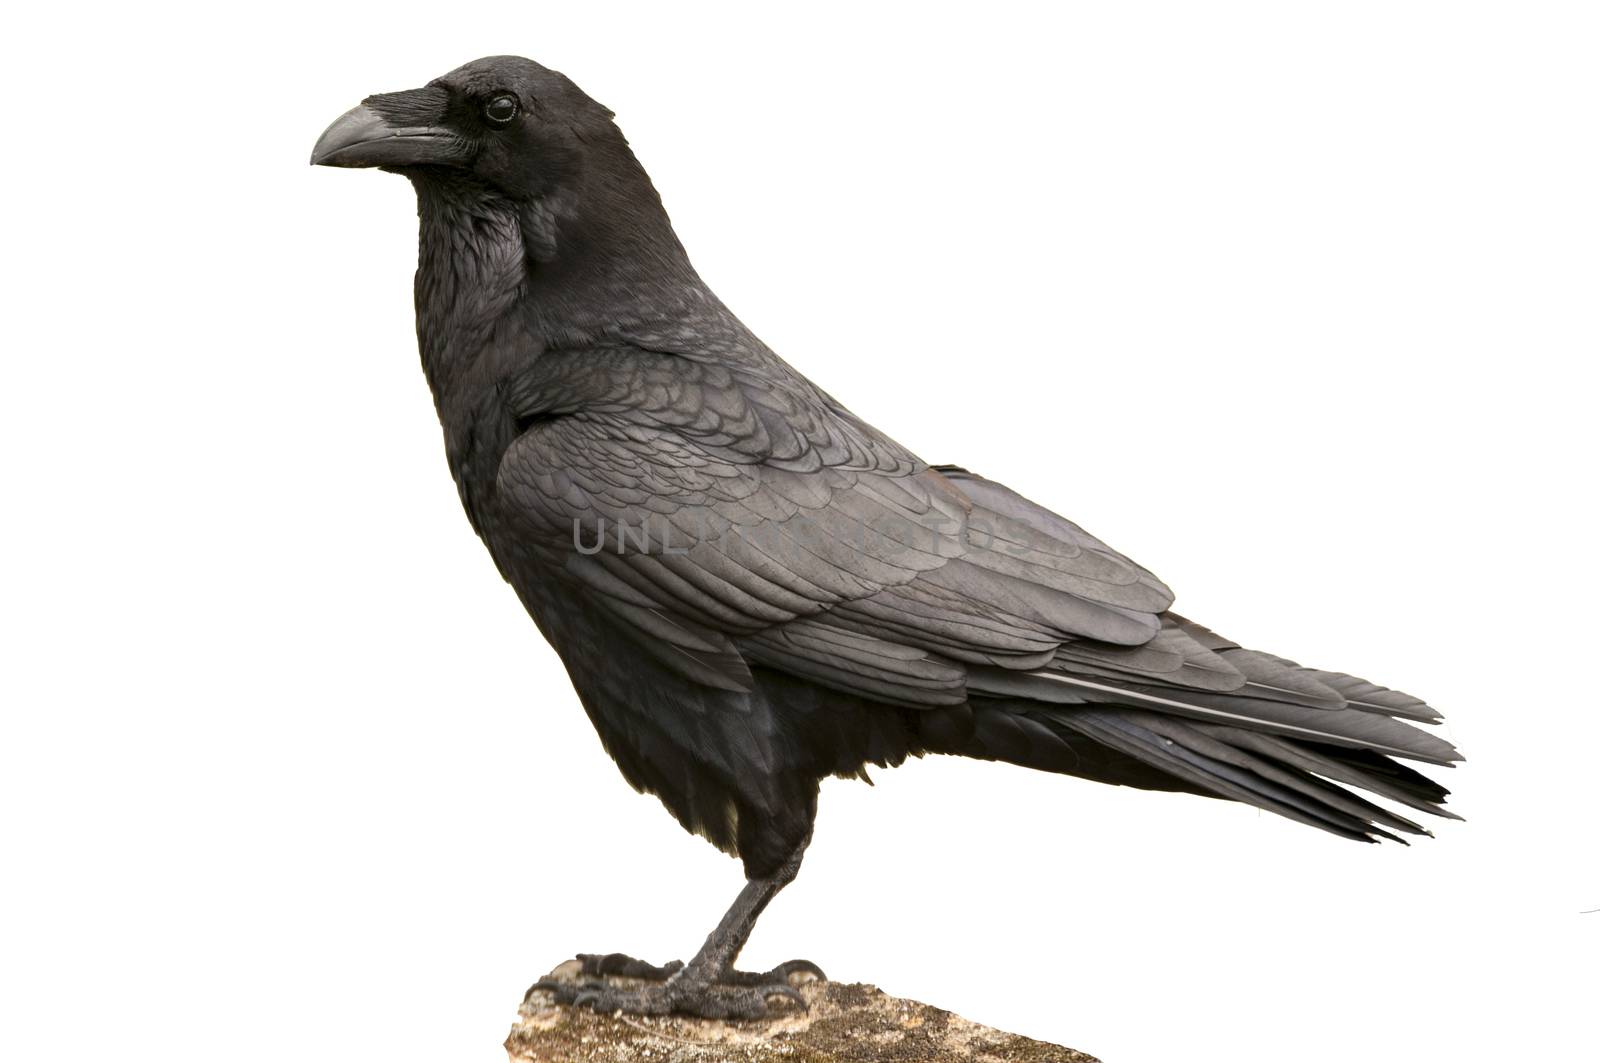 Raven - Corvus corax Portrait of body and plumage, white backgro by jalonsohu@gmail.com